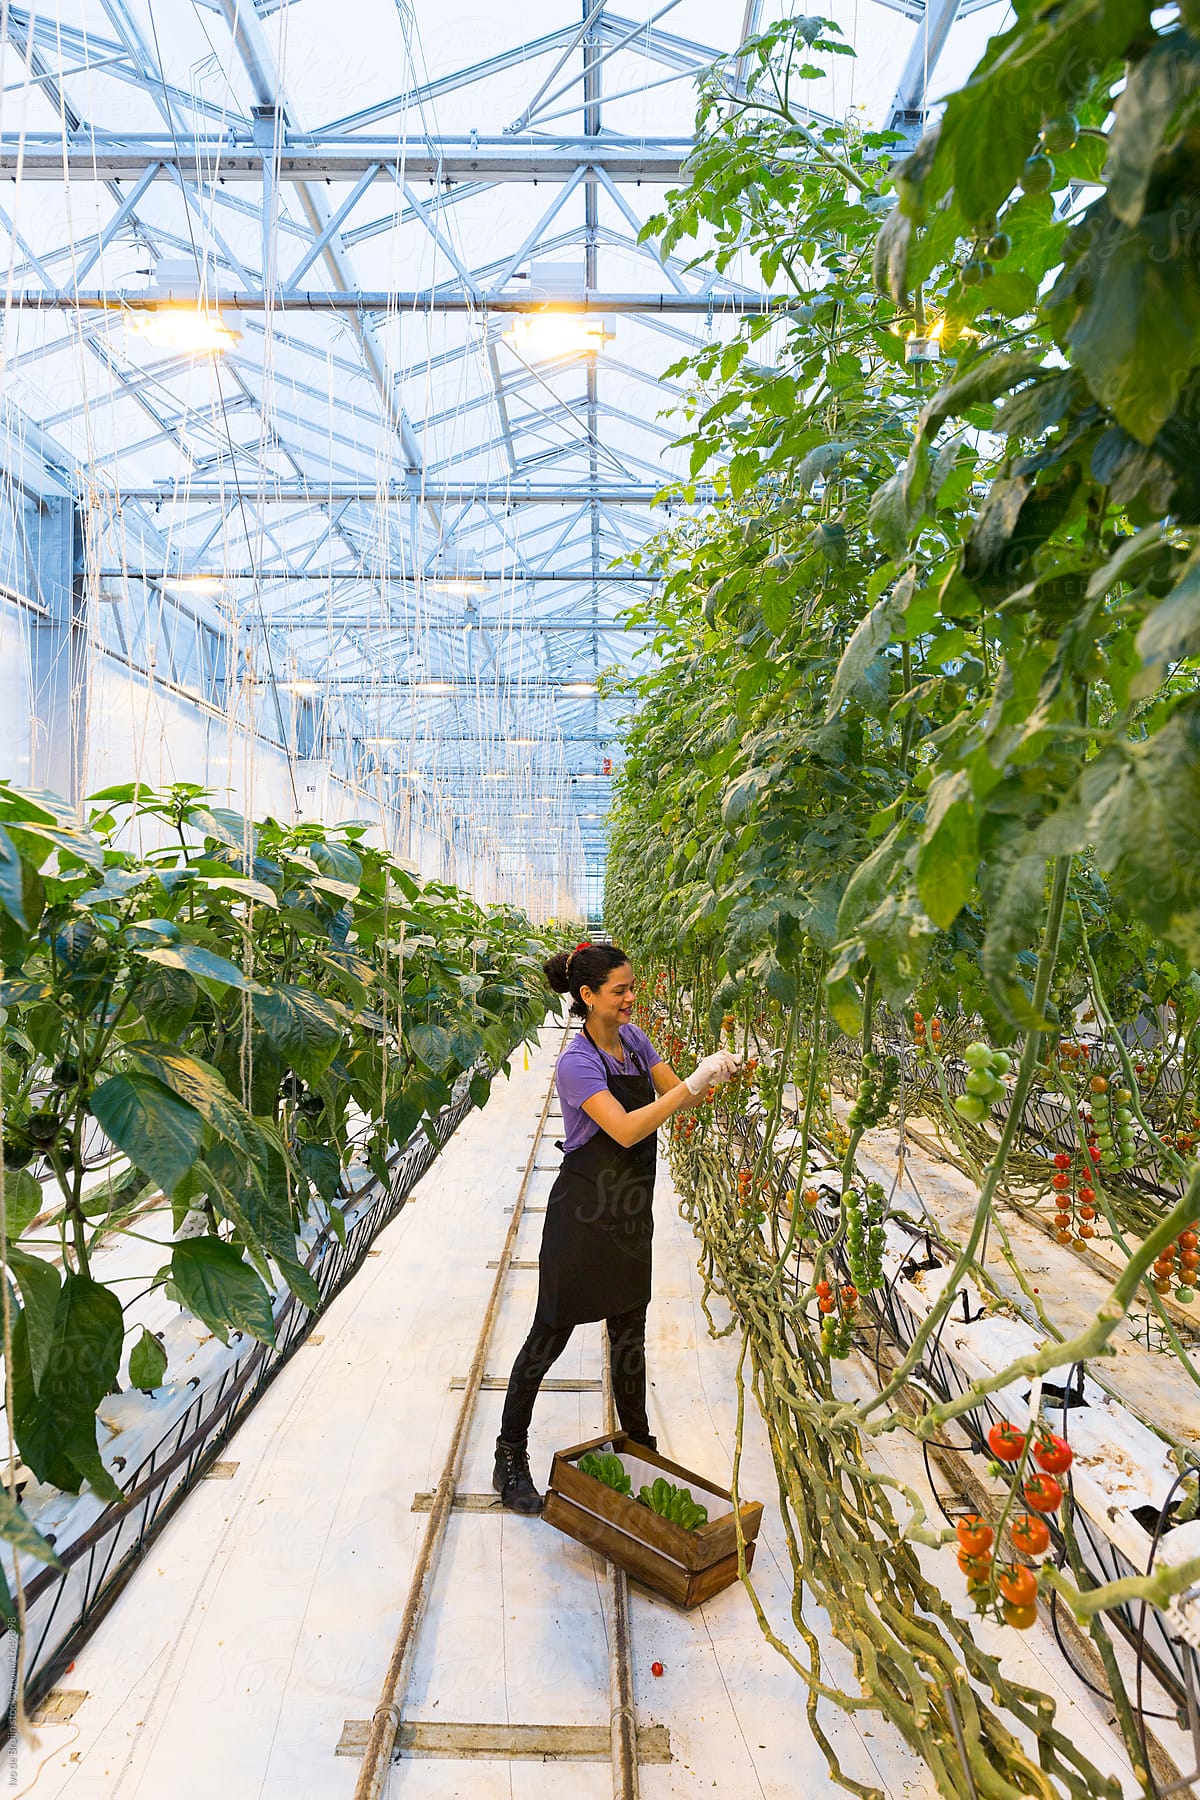 Female worker or employee picking tomatoes in a modern greenhouse